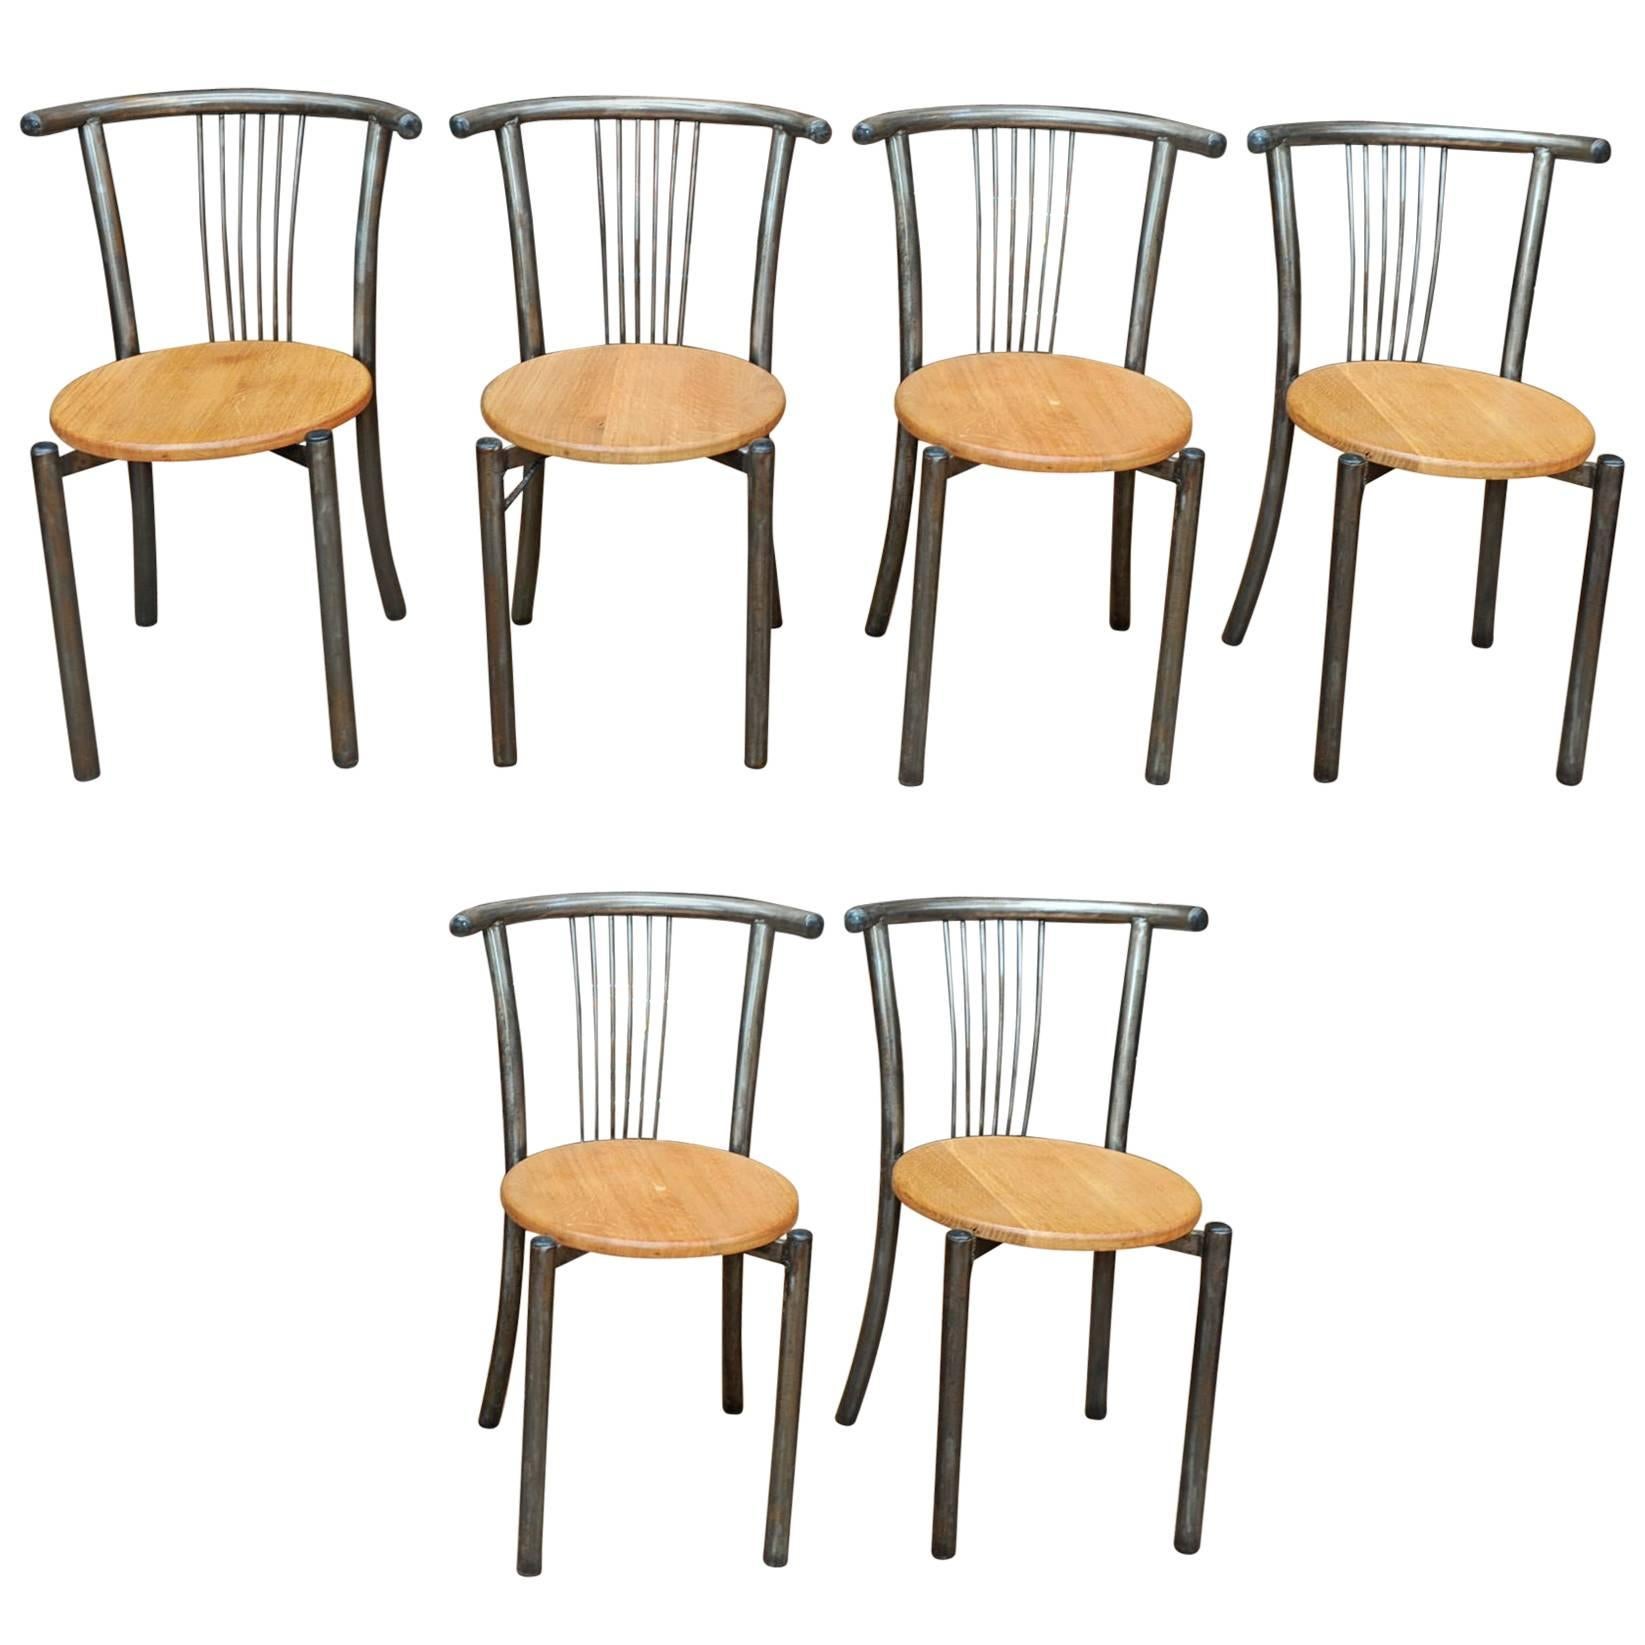 Set of Six Industrial and Design Mid-Century Iron and Oak Chairs, 1950s